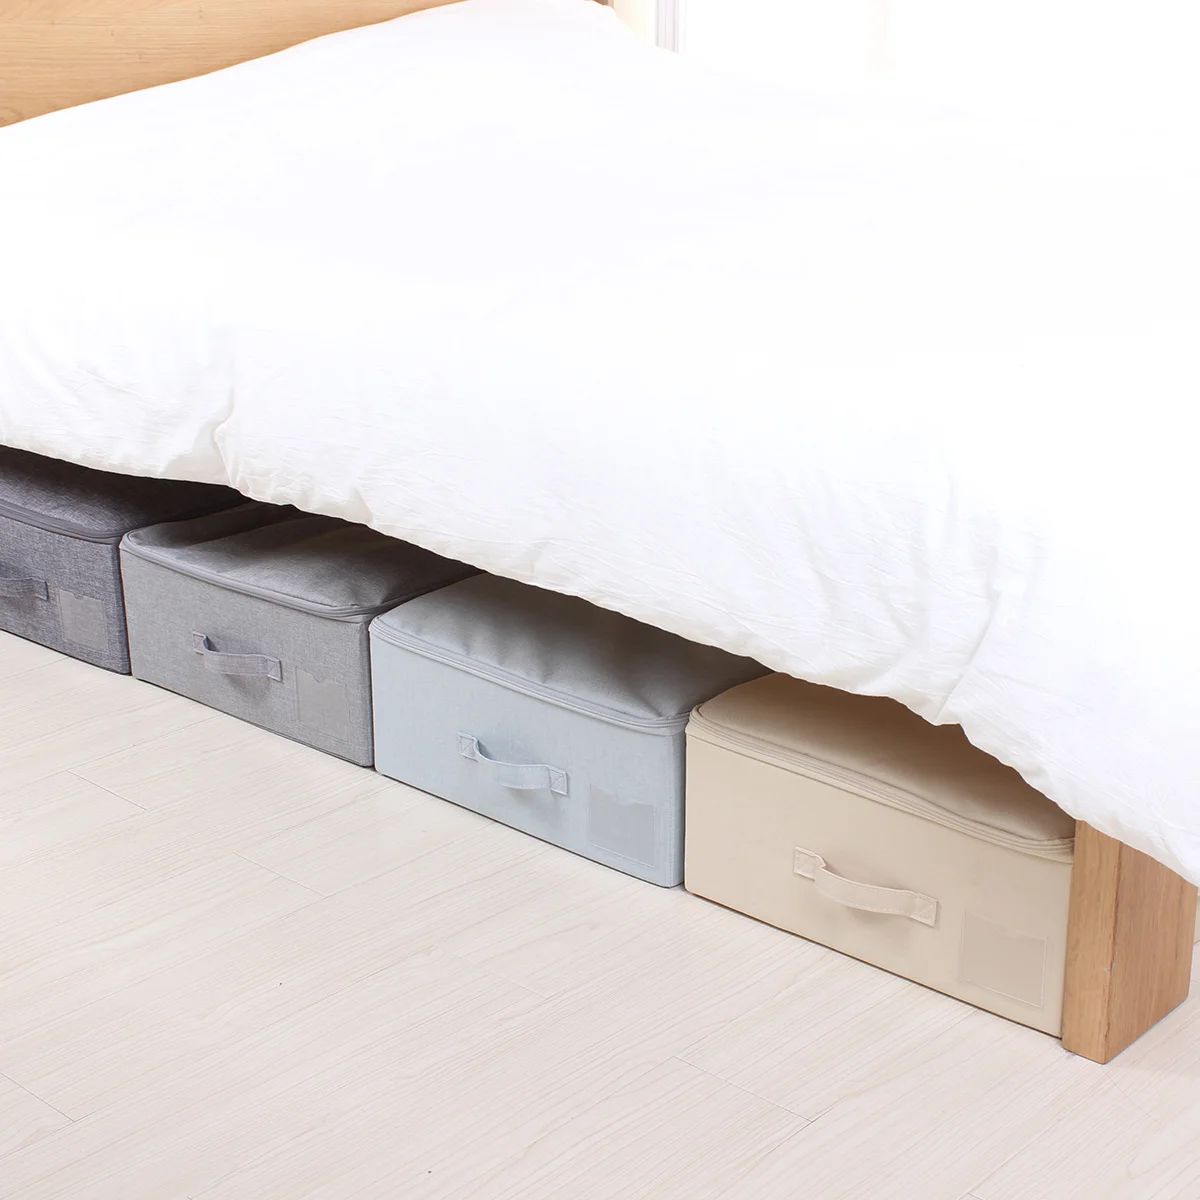 Large Rigid Under The Bed Storage Container For Duvets, Blankets Bedding Accessories, Black Gray | Wayfair North America